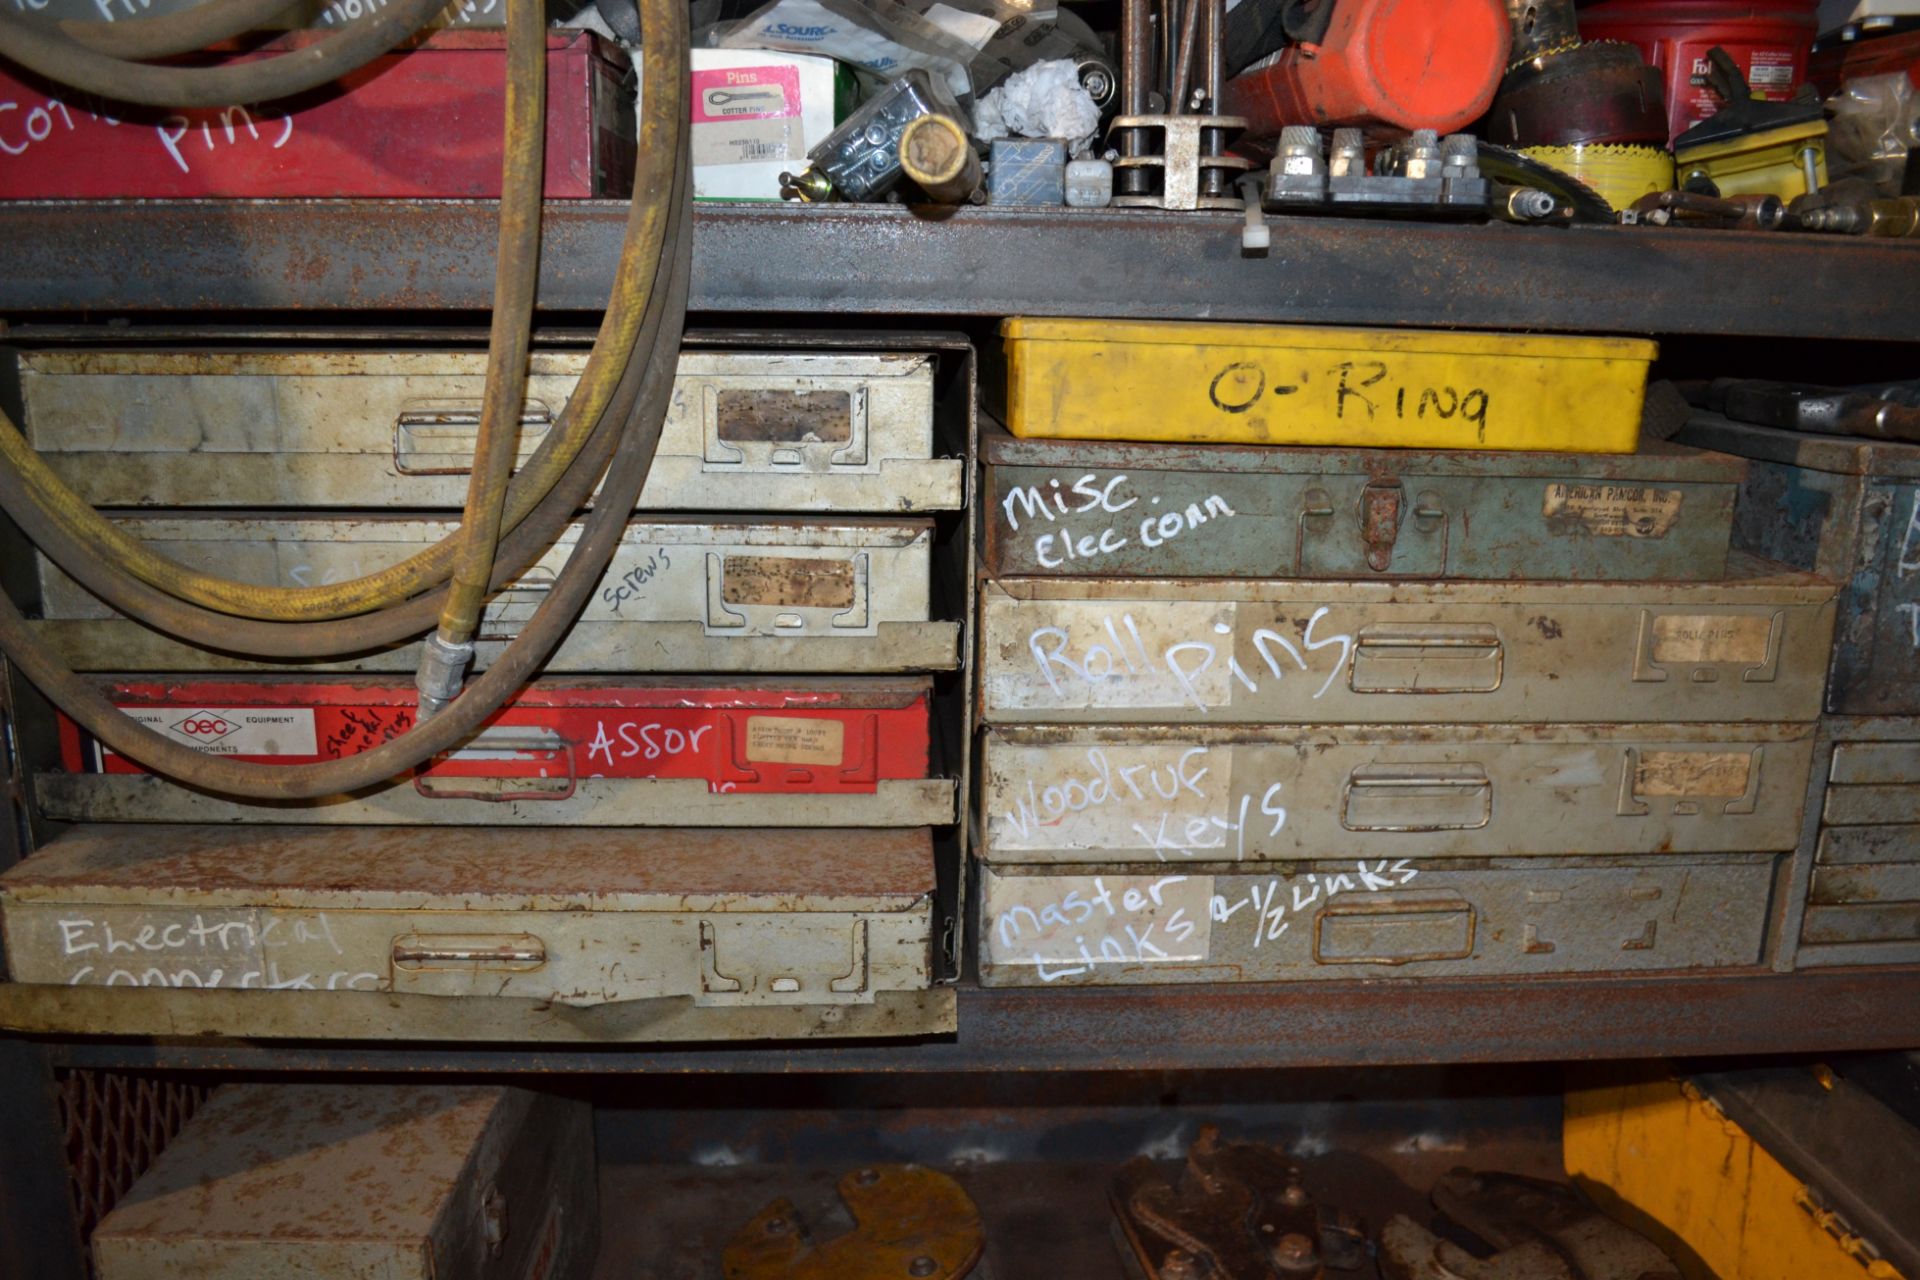 Lot Consisting of: Proto Tool Check, Metal Cabinet, Steel Table, (2) Sections Metal Shelving, - Image 25 of 76